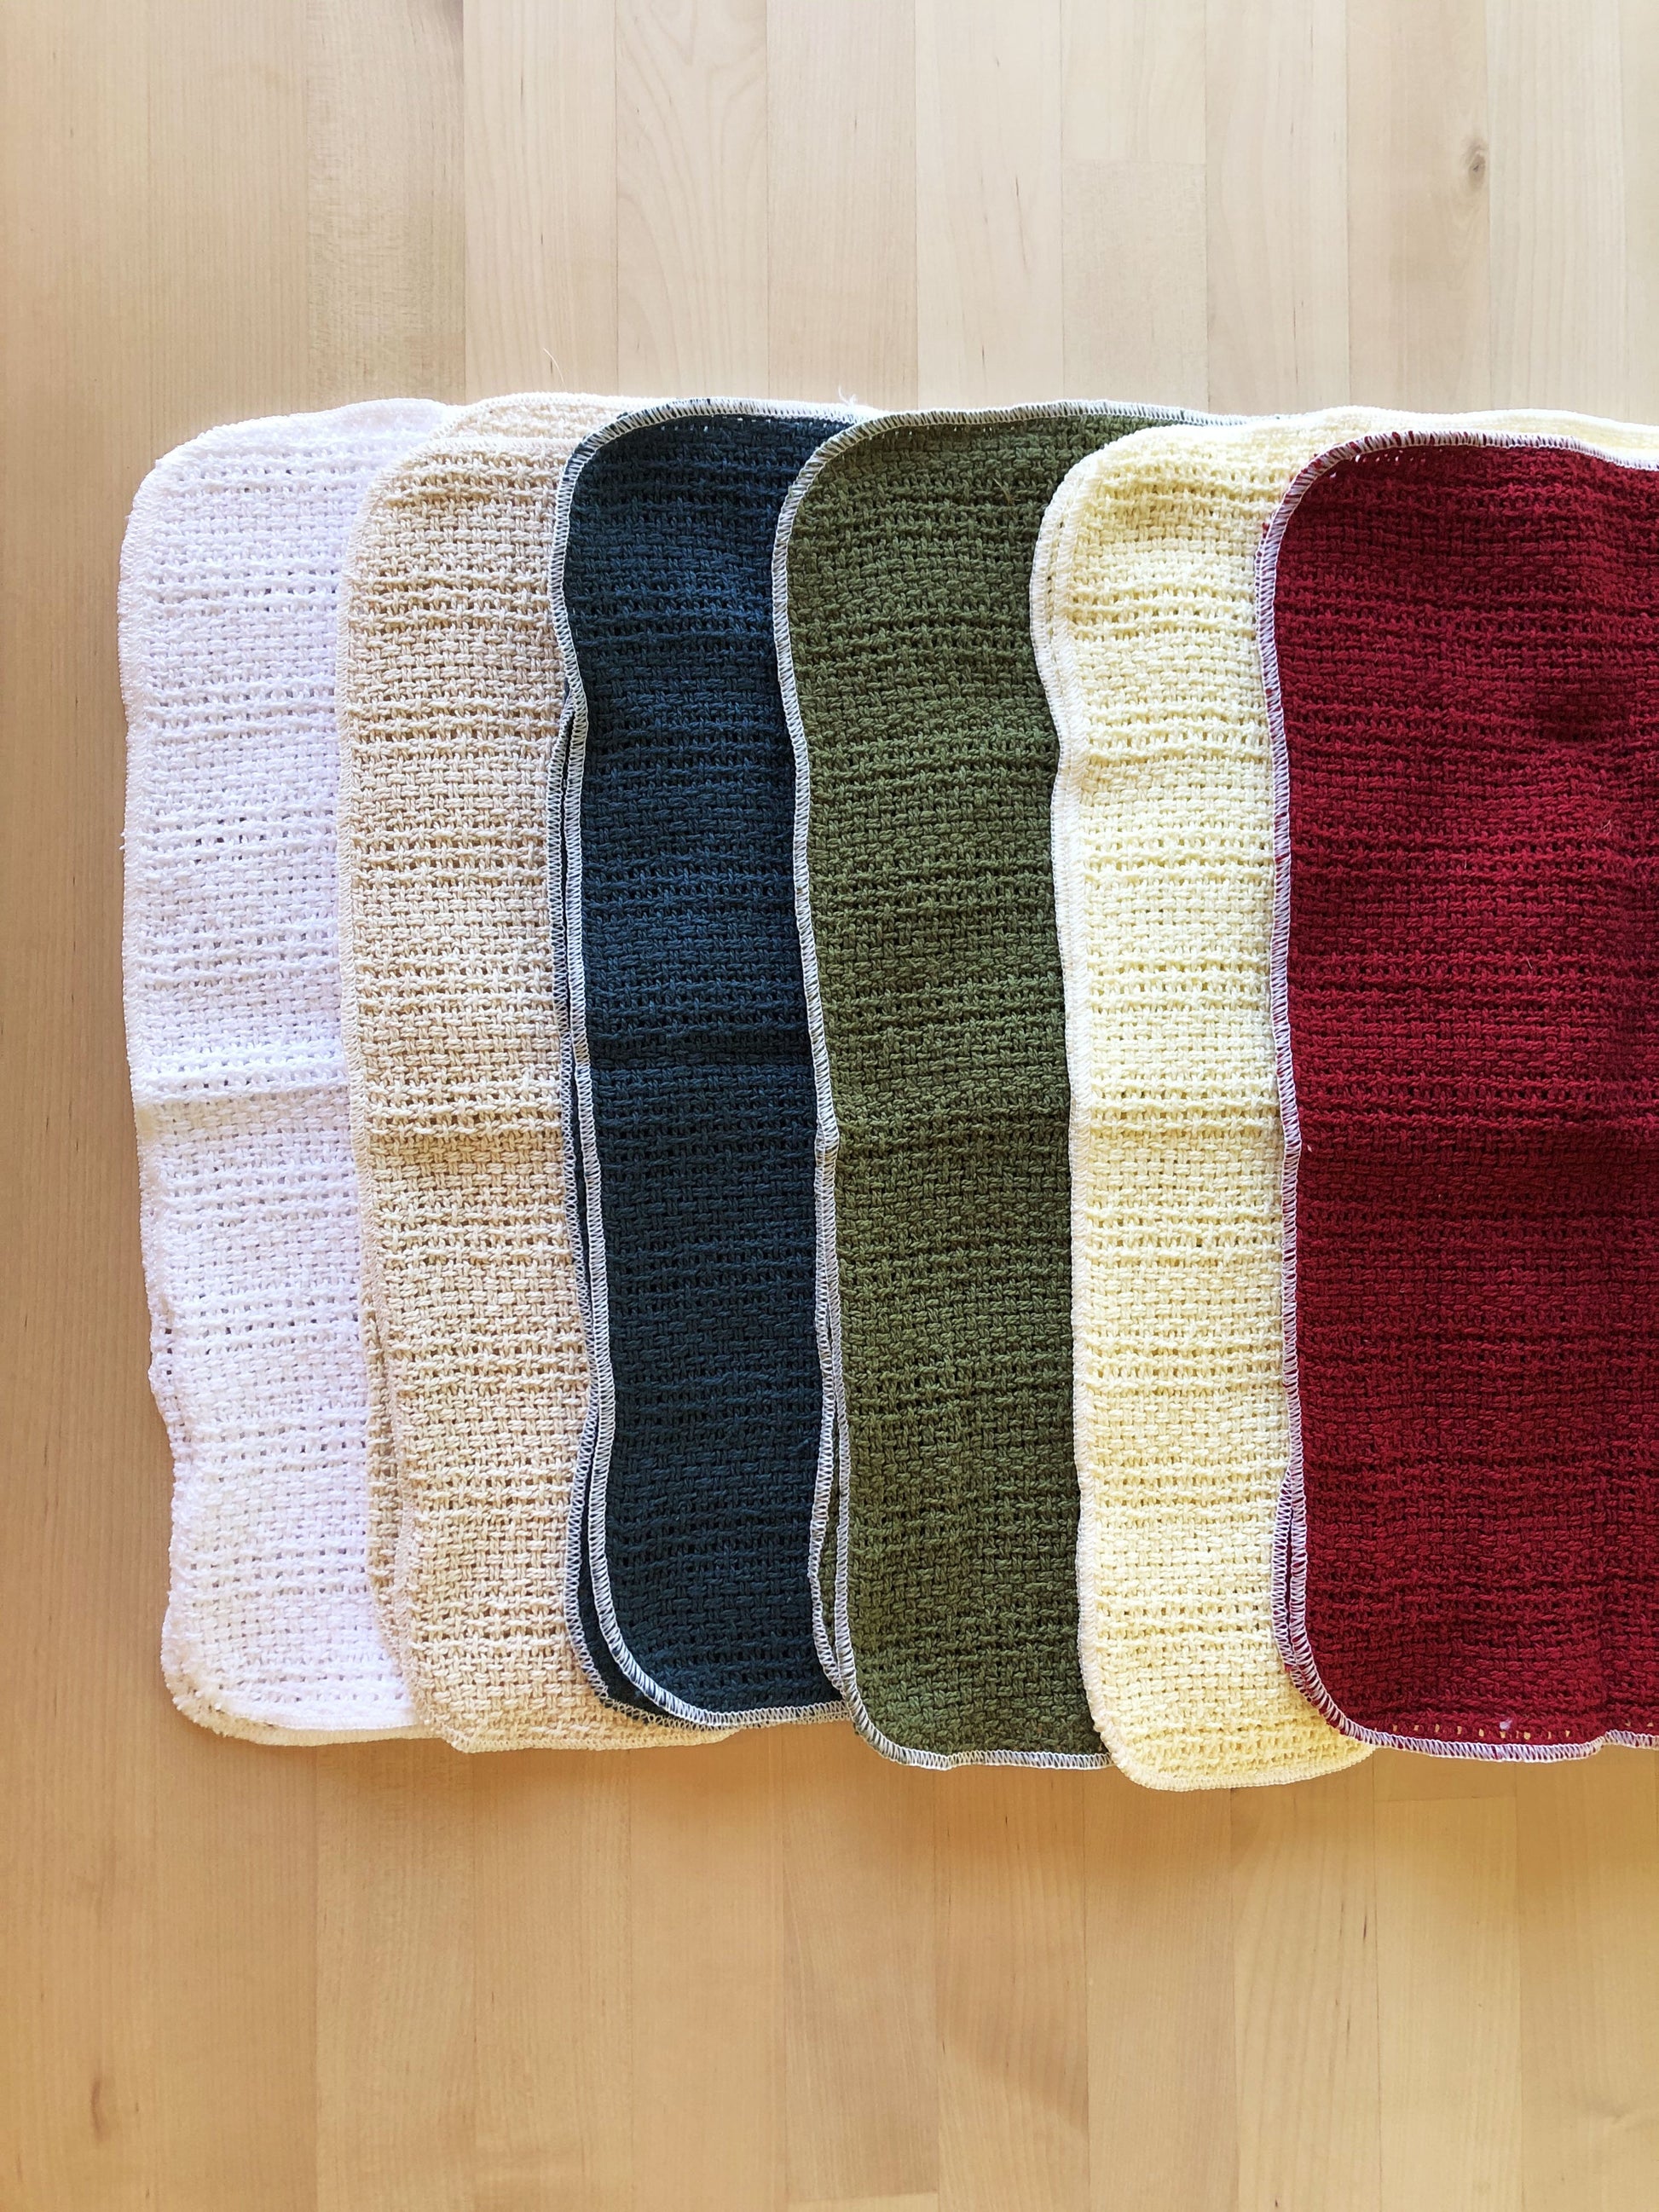 Made in the USA Dish Cloths - Set of 4 - American Made Dish Cloths Towels - American Home USA - 6 Colors